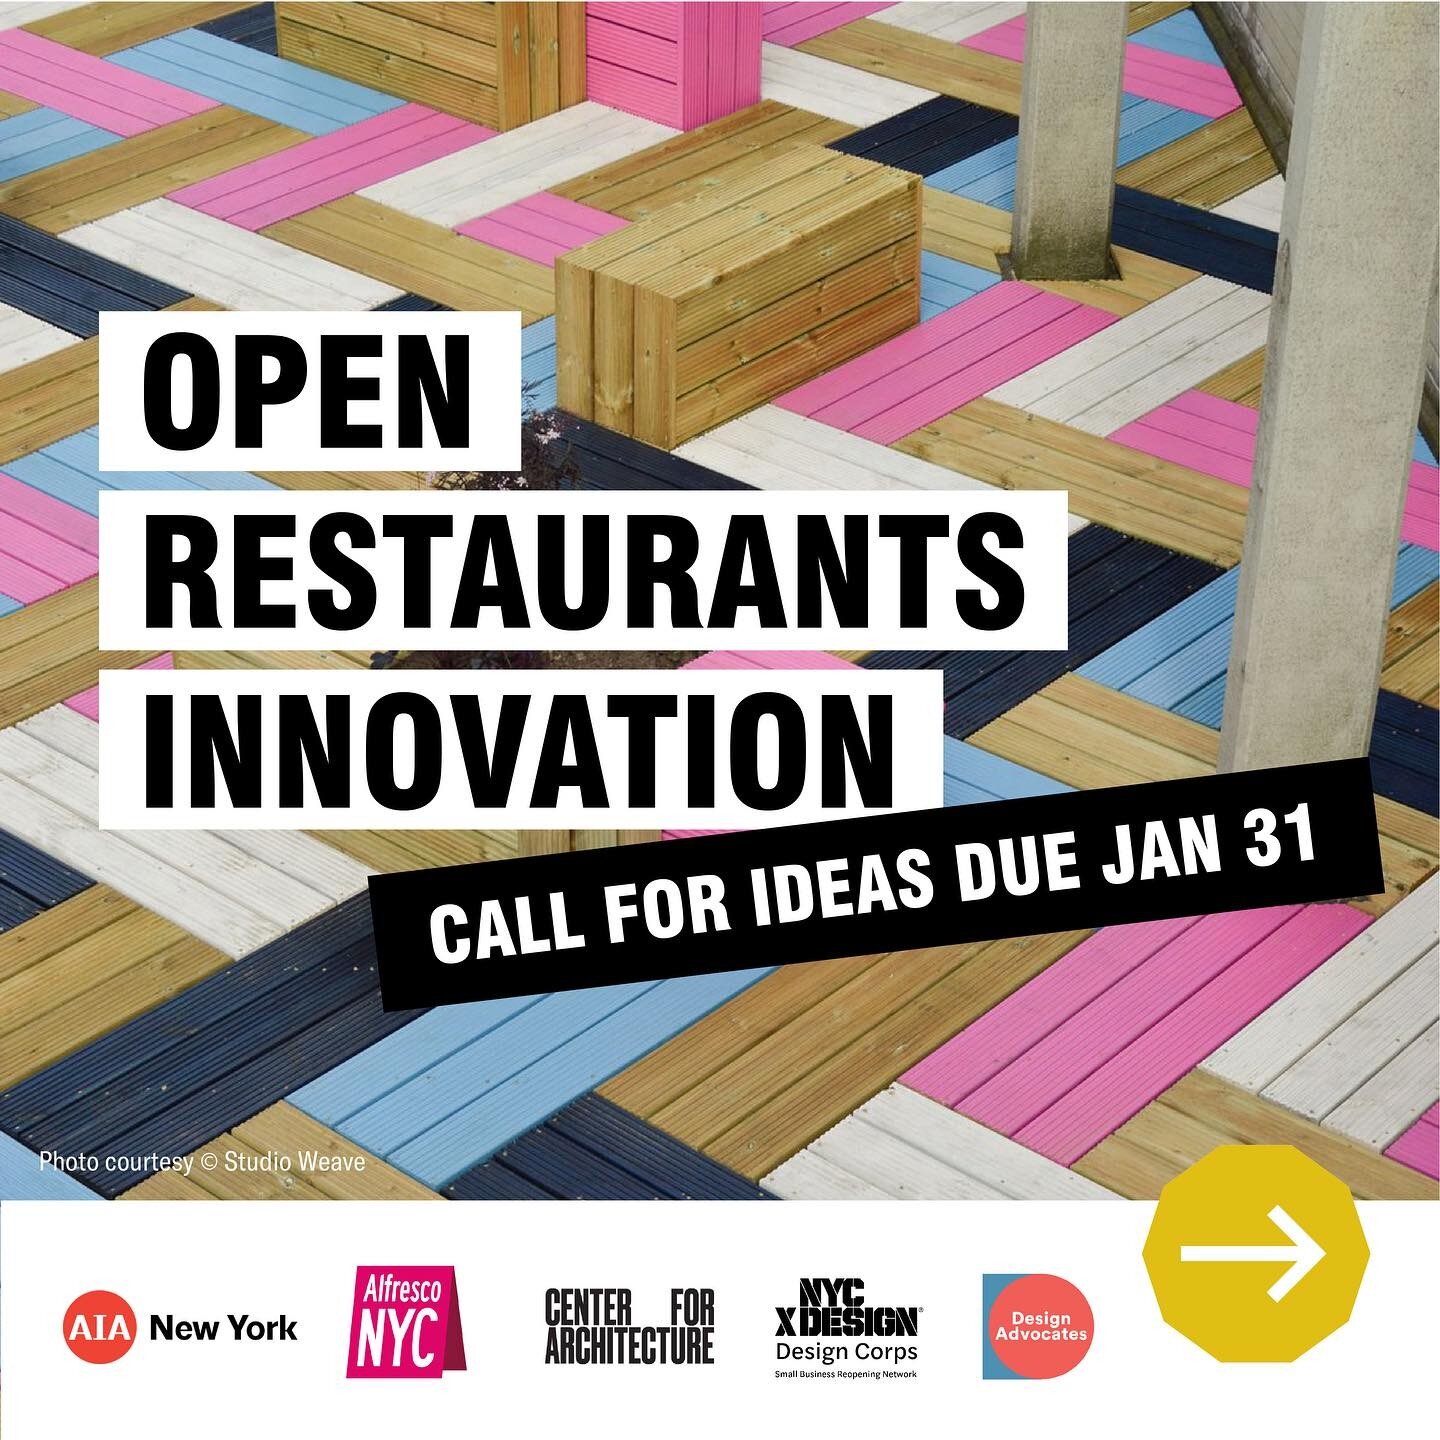 Deadline Jan 31!! Design Advocates are pleased to announce Open Restaurants Innovation, a call for submissions from designers, restaurateurs, and anyone who wants to see the NYC Open Restaurants program, which allows restaurants to use the sidewalk a